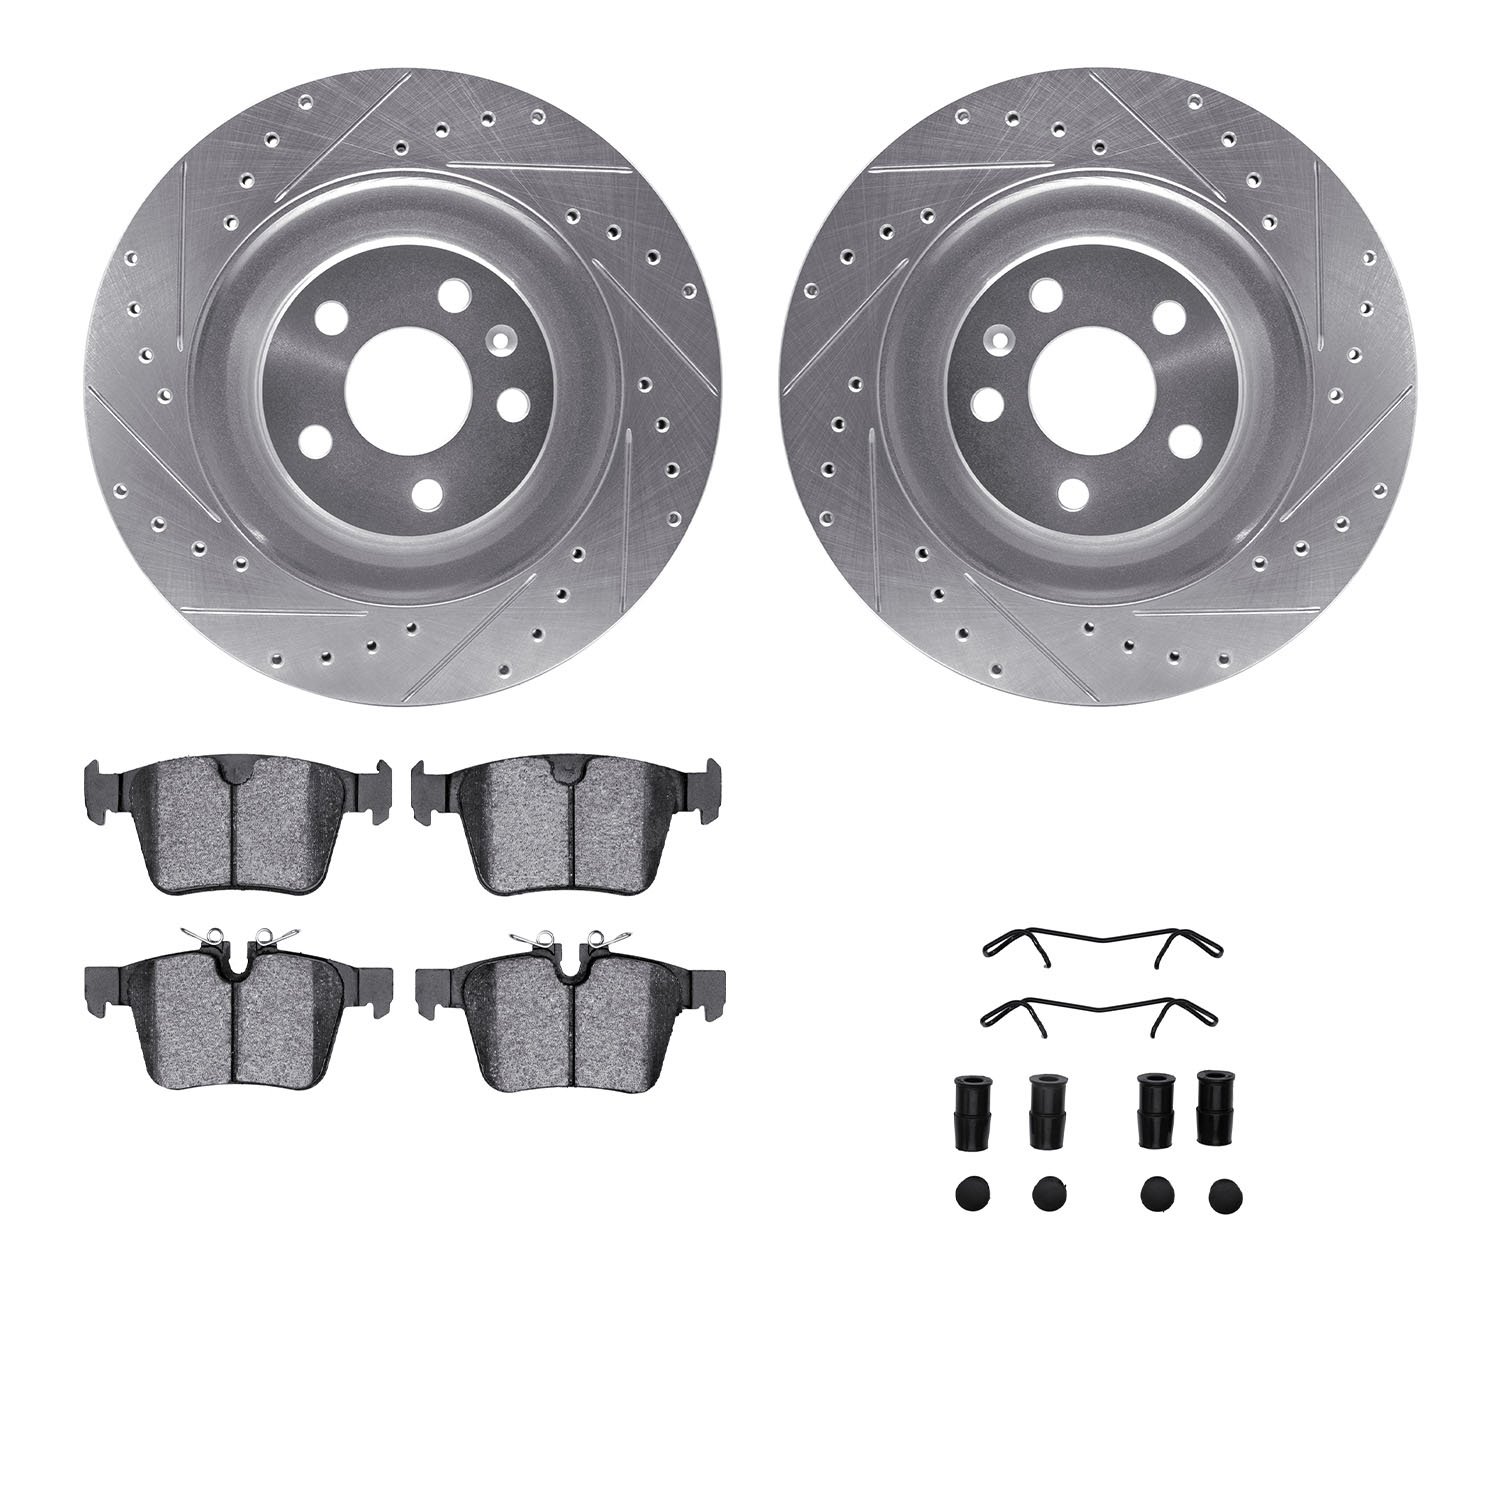 7312-27073 Drilled/Slotted Brake Rotor with 3000-Series Ceramic Brake Pads Kit & Hardware [Silver], Fits Select Multiple Makes/M